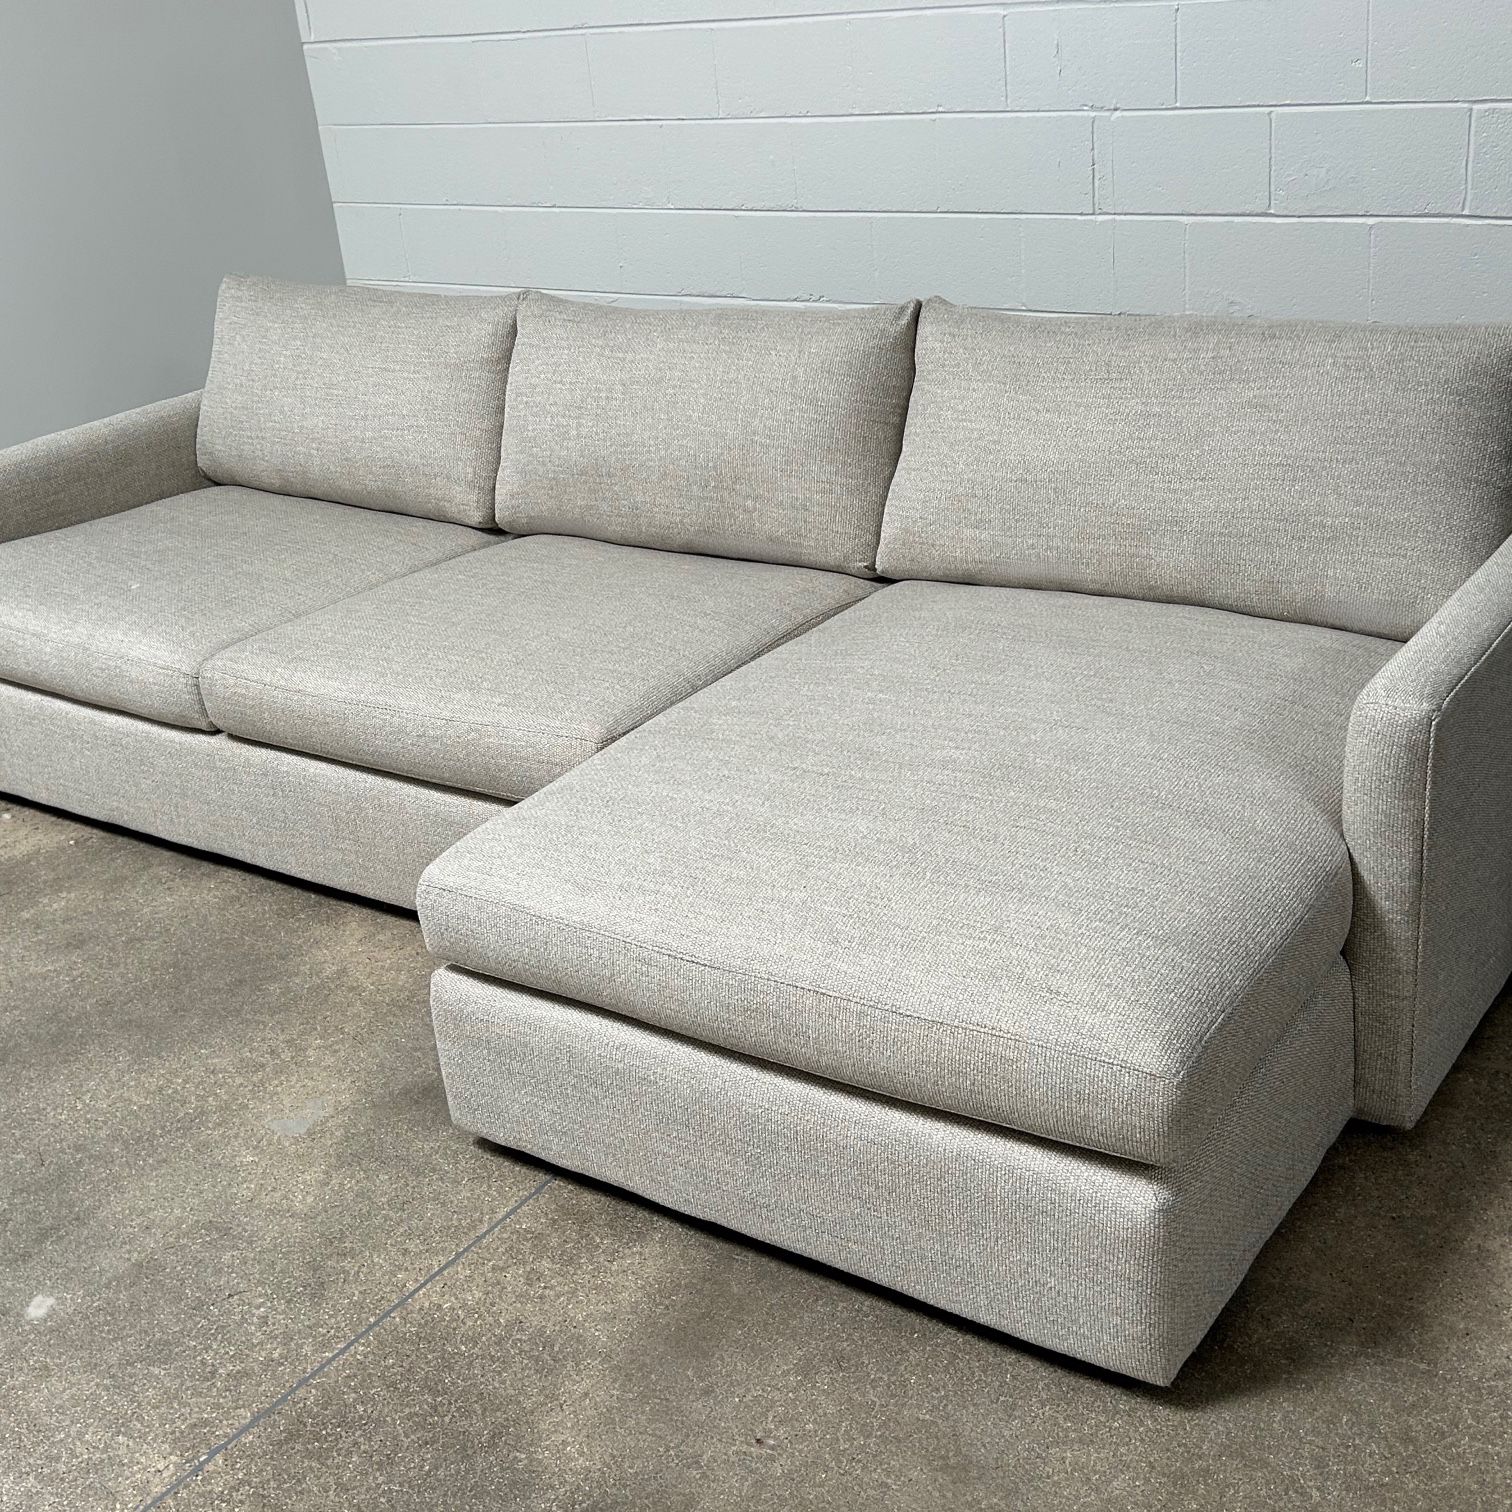 Crate & Barrel 2-Piece Deep Lounge Sectional Couch 